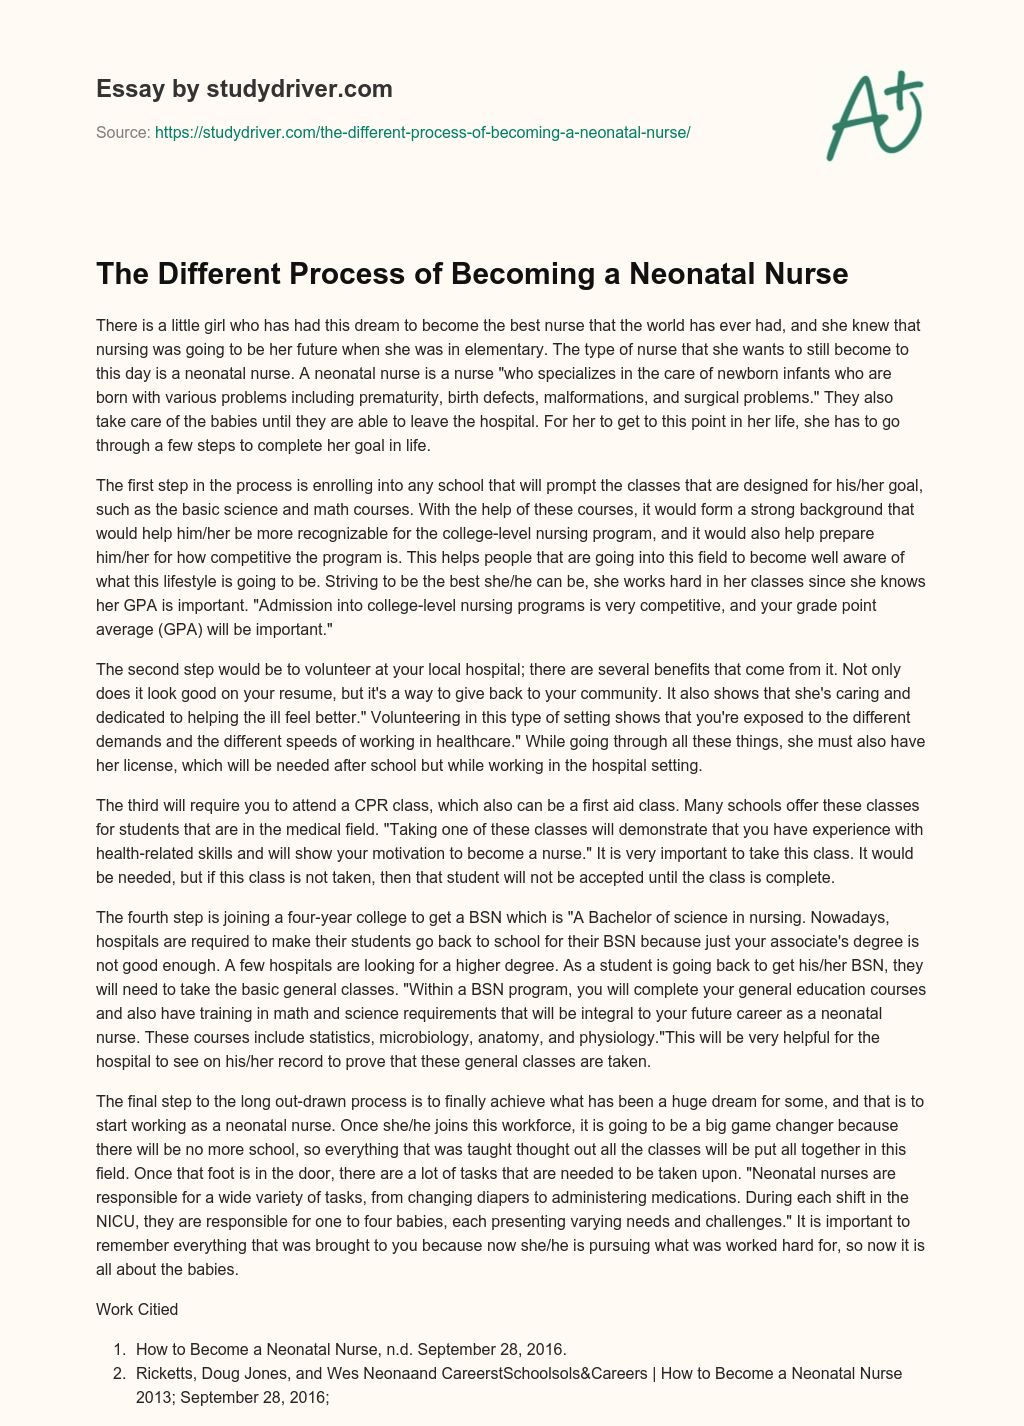 The Different Process of Becoming a Neonatal Nurse essay